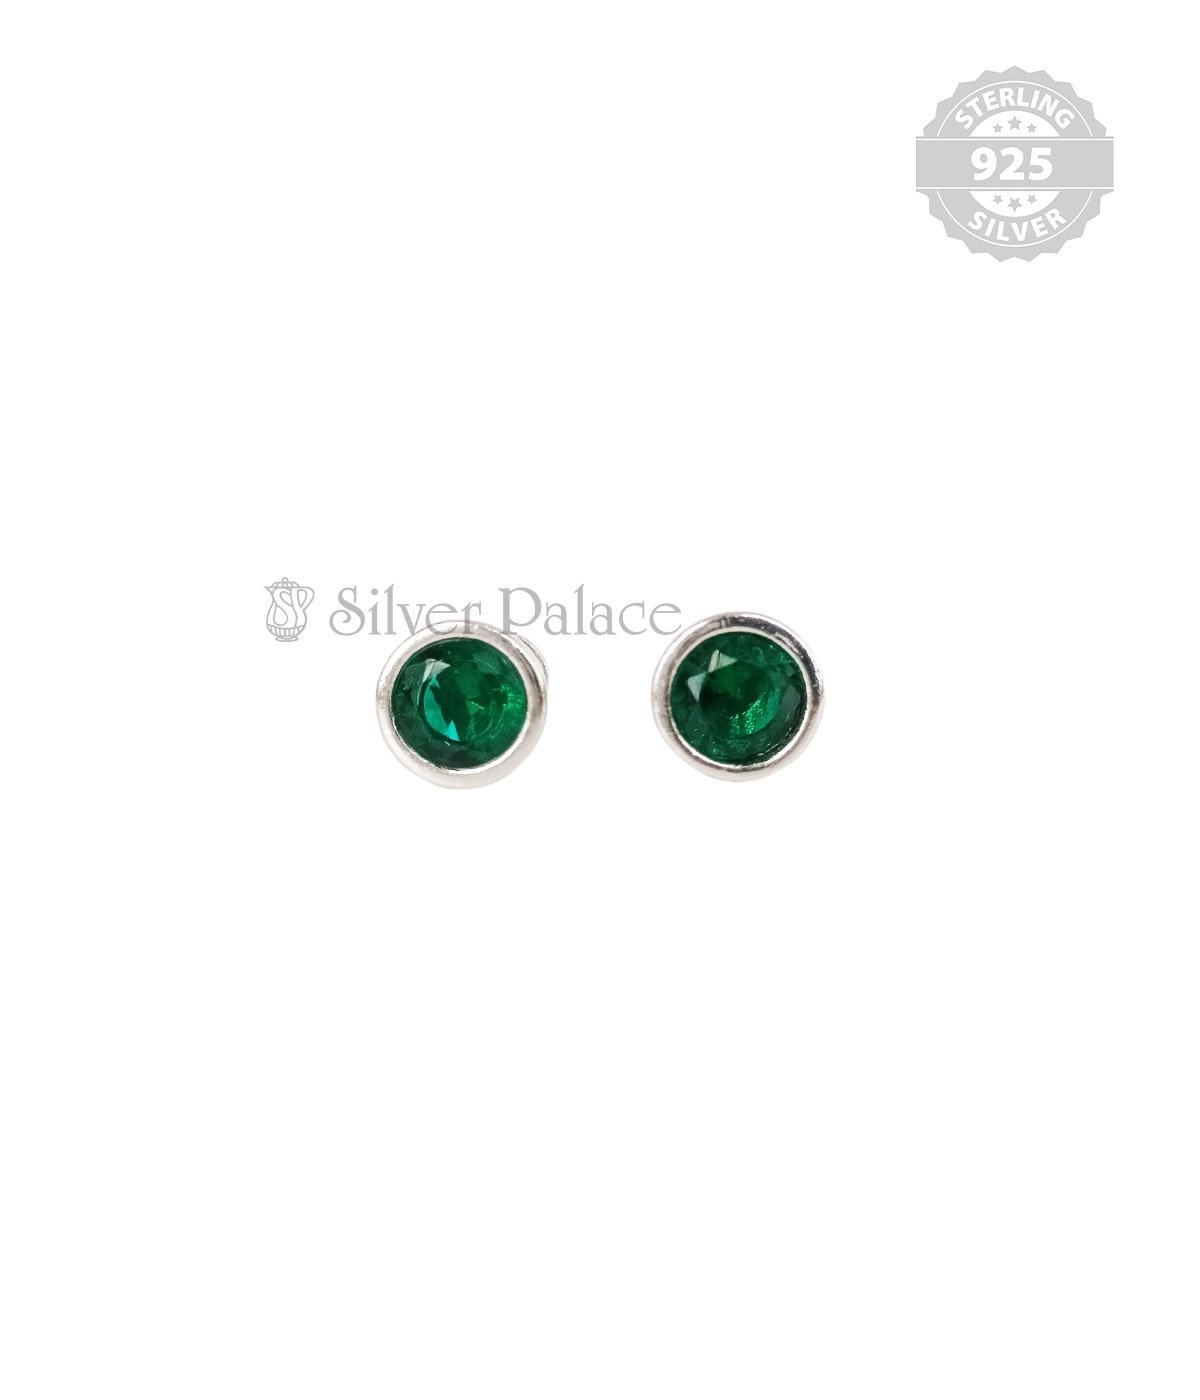 92.5 STERLING SILVER EMERALD SINGLE STONE STUD FOR GIRLS